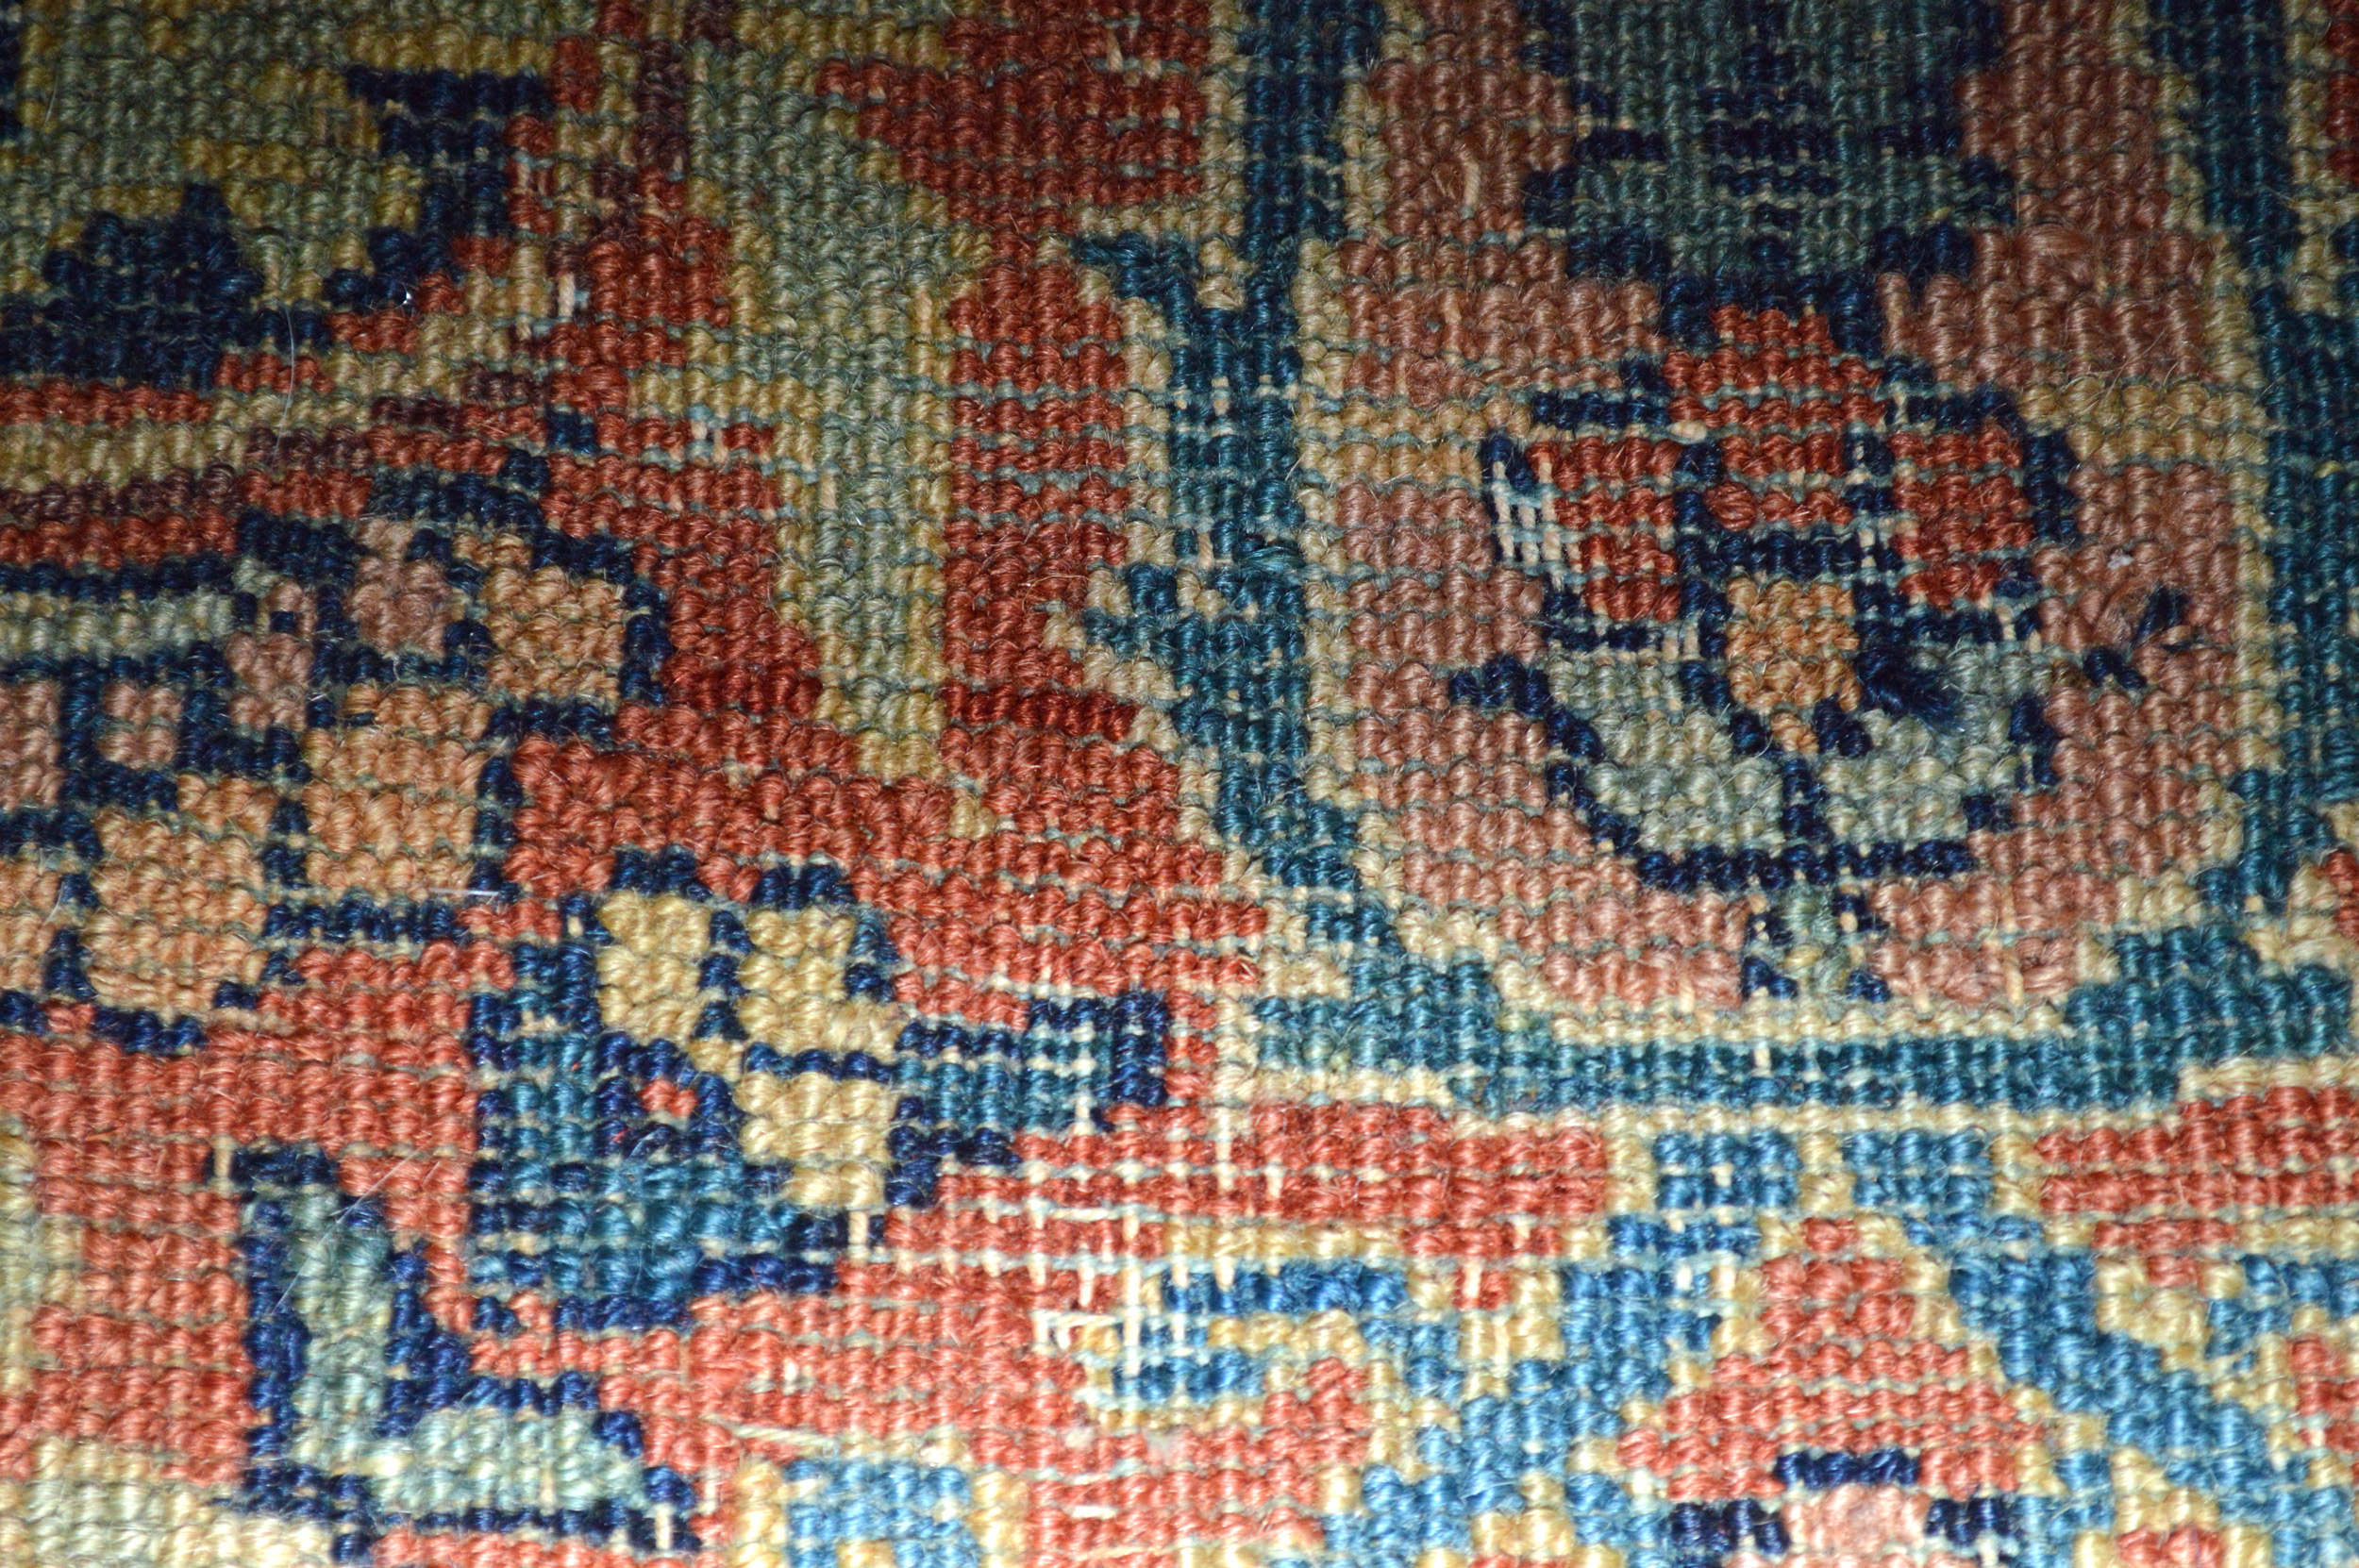 Weave detail from an antique south Persian Afshar tribal rug with a Boteh design on a navy blue field - Douglas Stock Gallery, antique Oriental rugs, antique tribal rugs Boston,MA area, tribal rugs New England